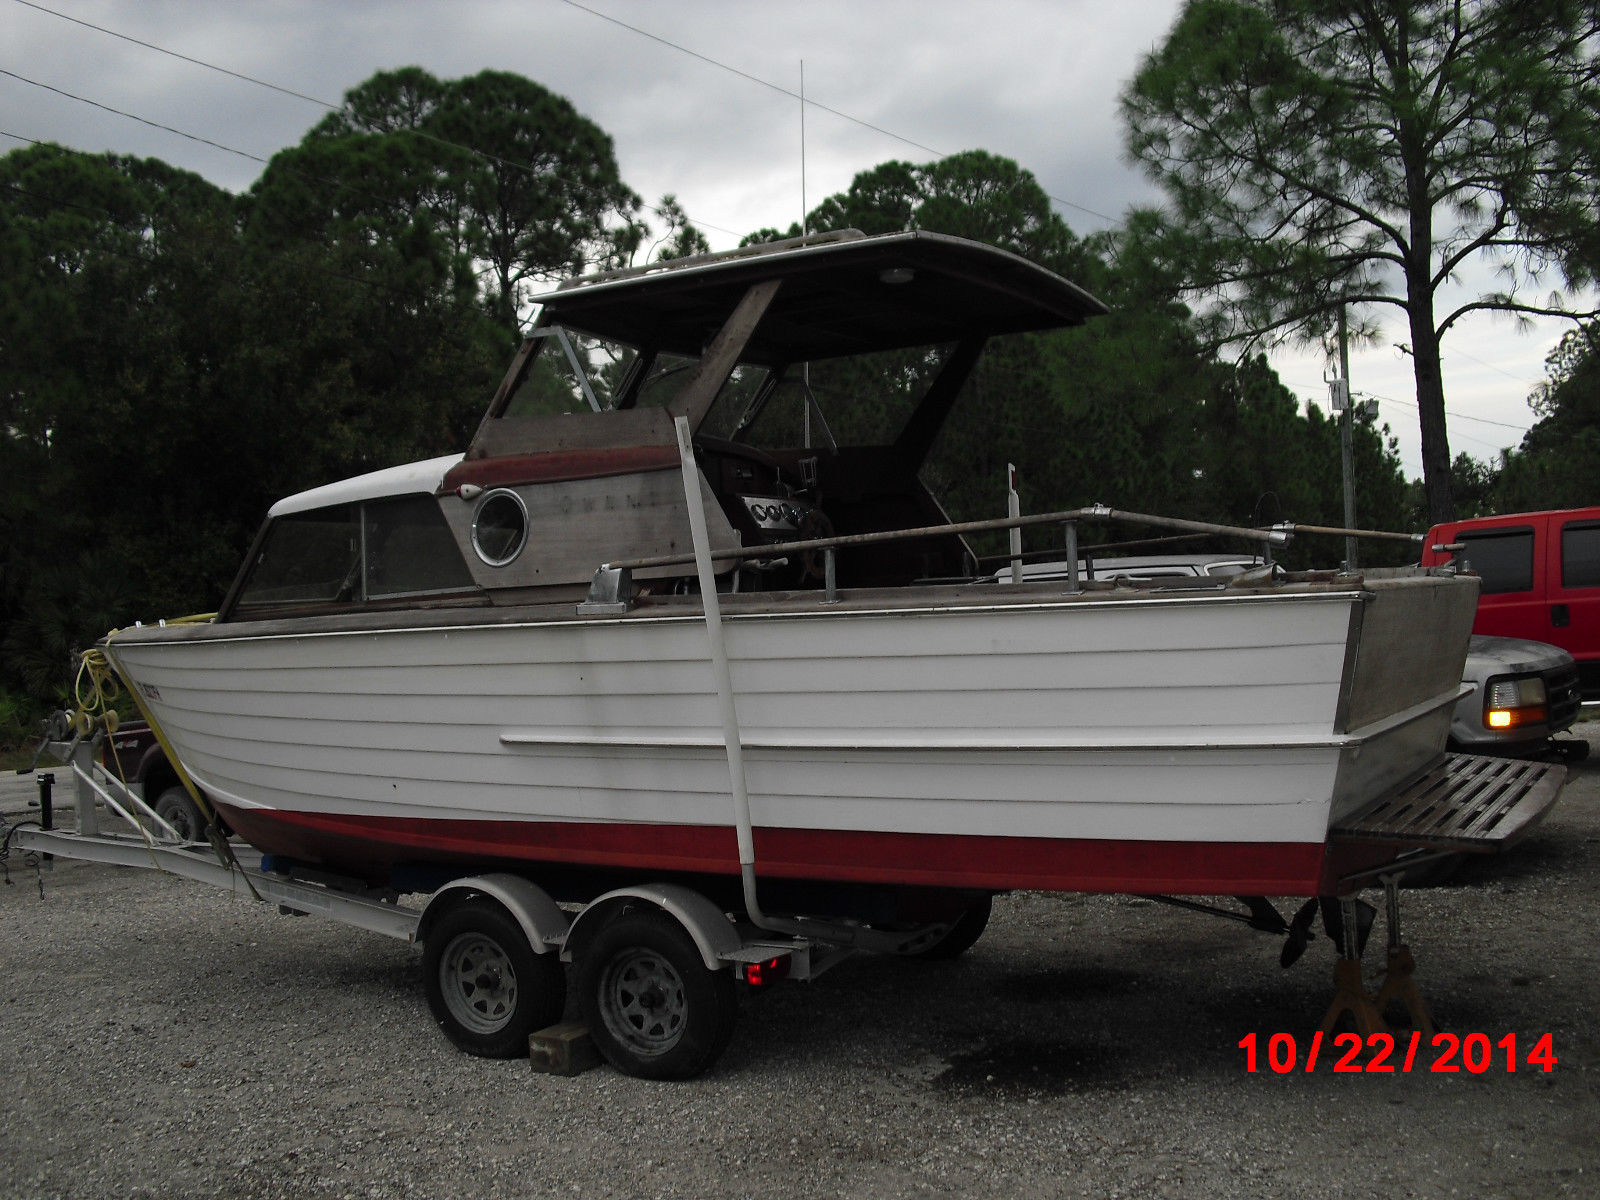 Owens Crusier 1959 for sale for $1,000 - Boats-from-USA.com